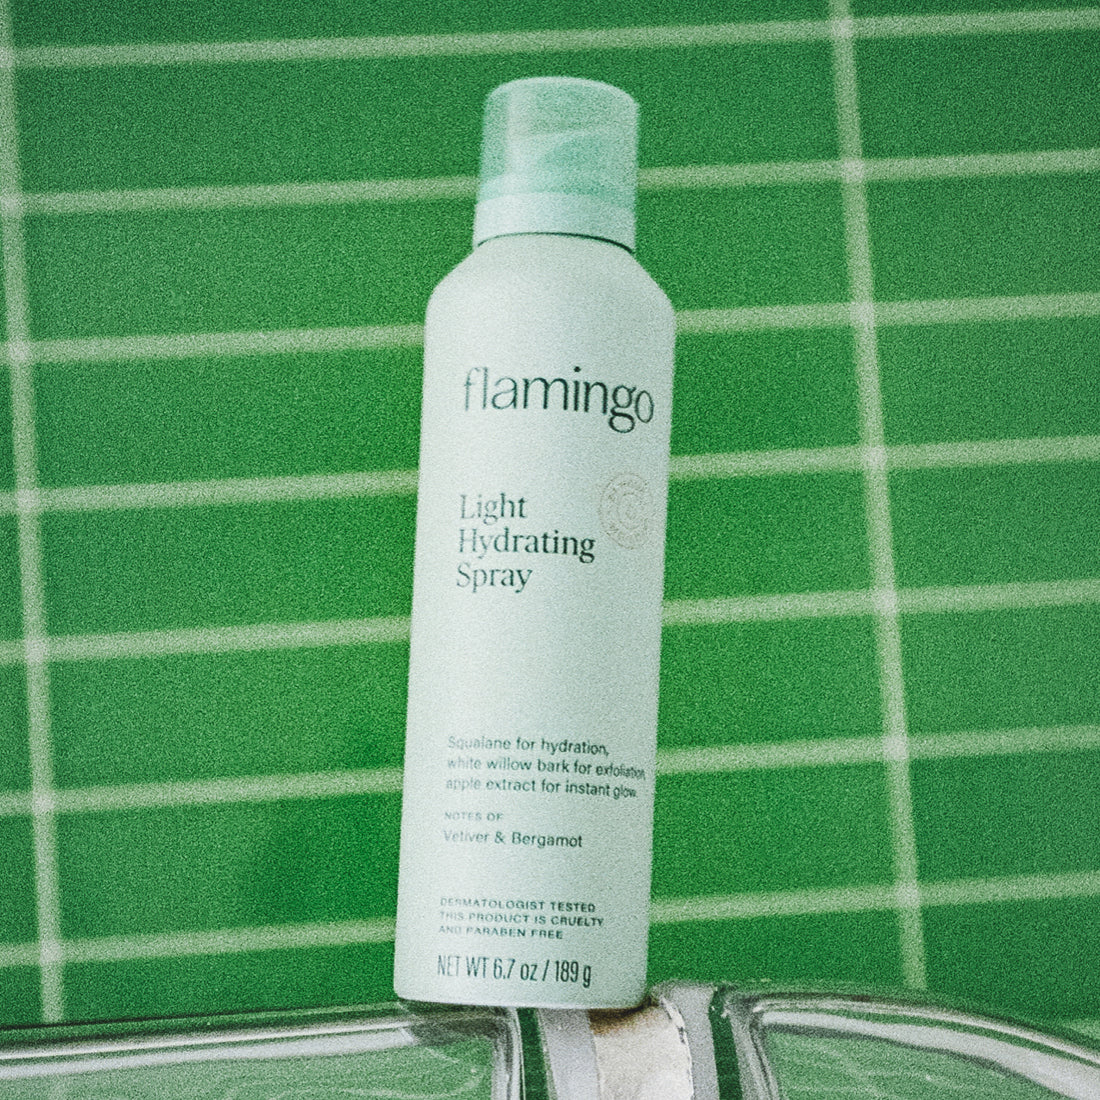 Pale green can of Flamingo Light Hydrating Spray in a bright green tiled bathroom